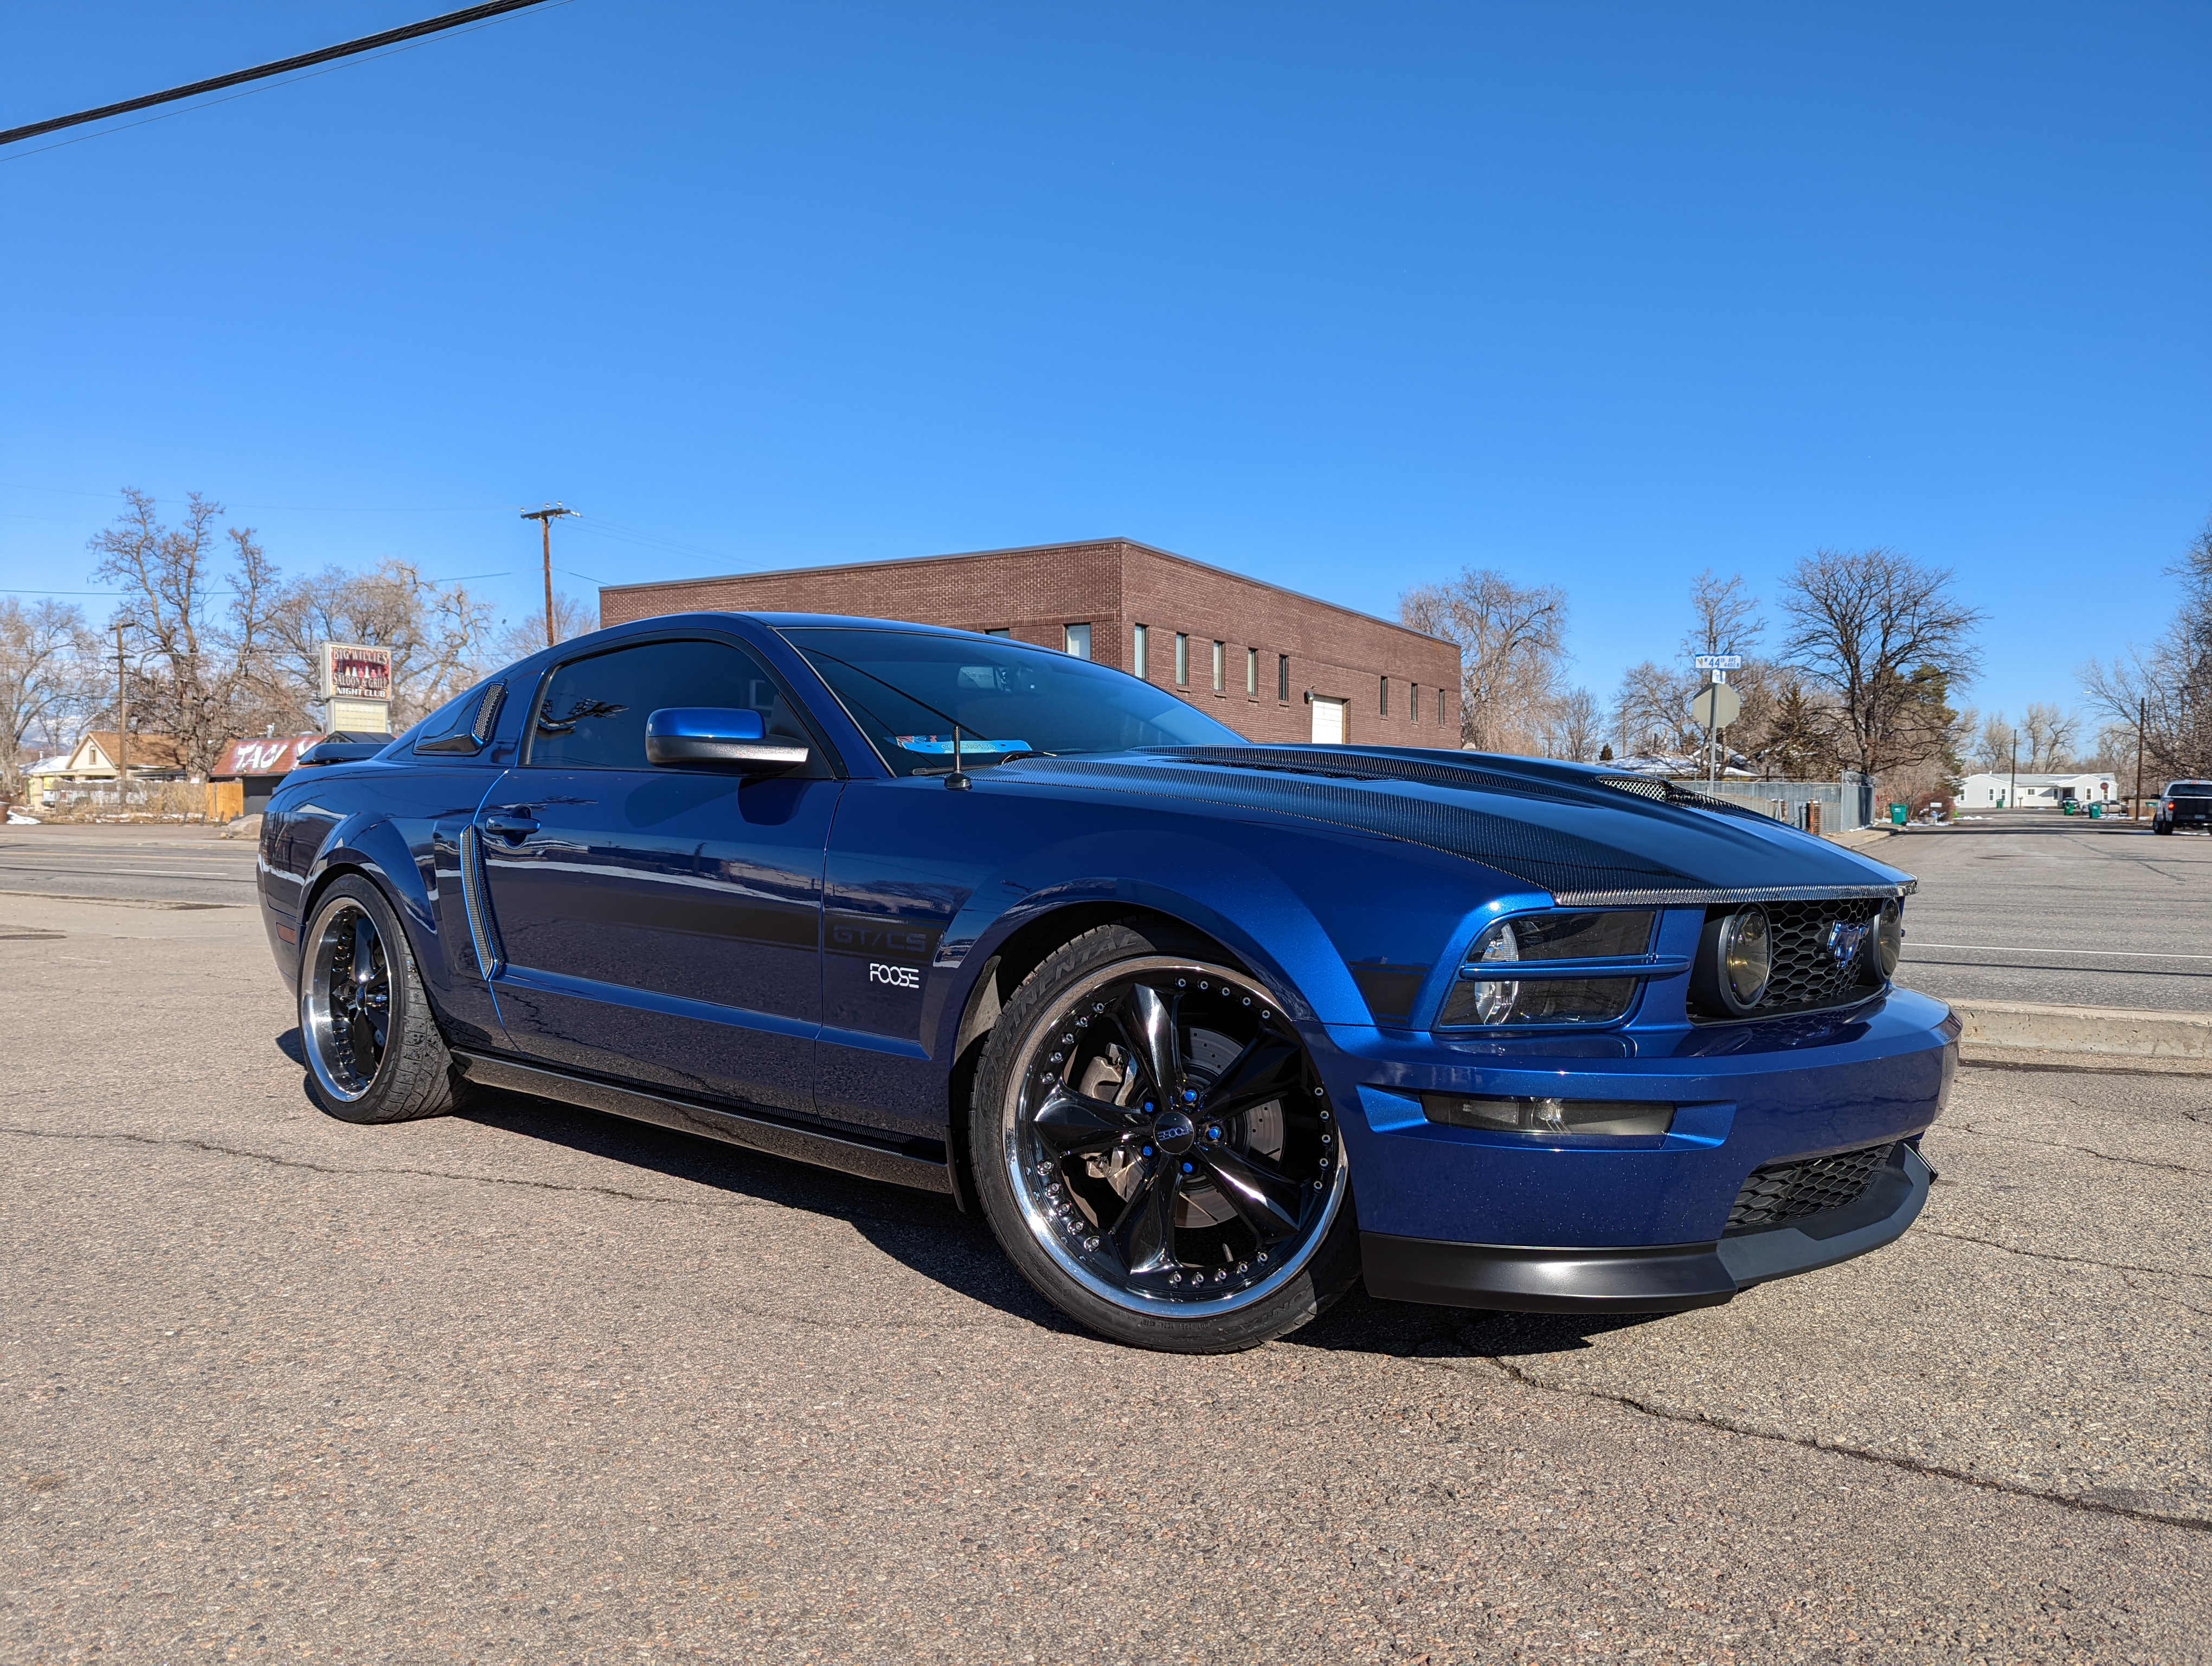 2008 Ford Mustang GT/CS Foose Edition final product.